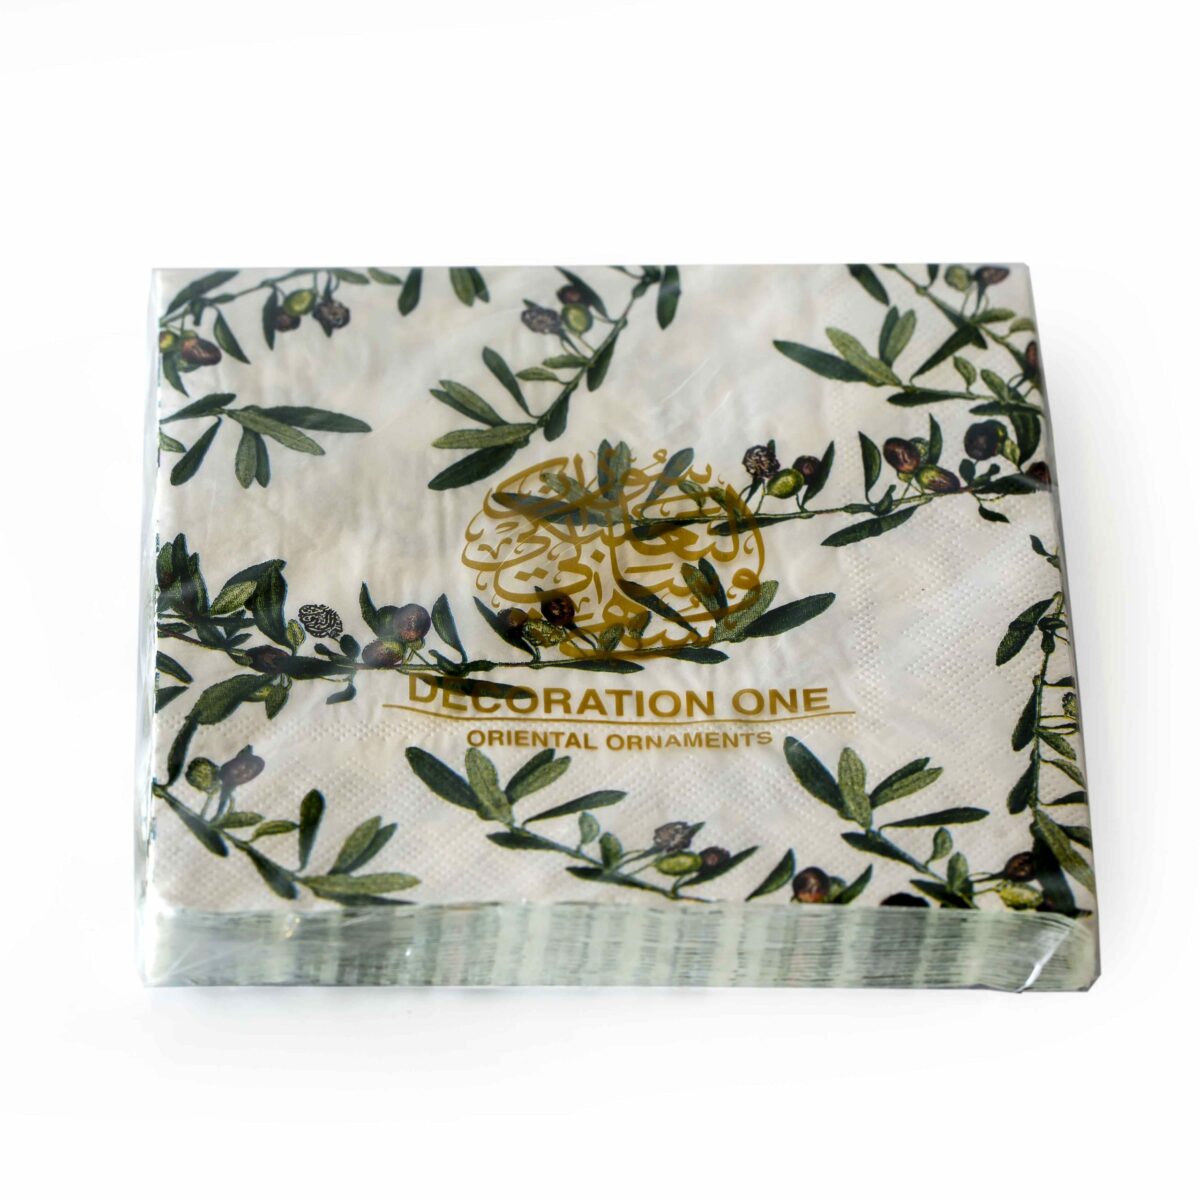 Printed napkins, with olive branches and leaves design. Napkin size 33x33cm when open, 3ply tissue, 20 napkins per pack.